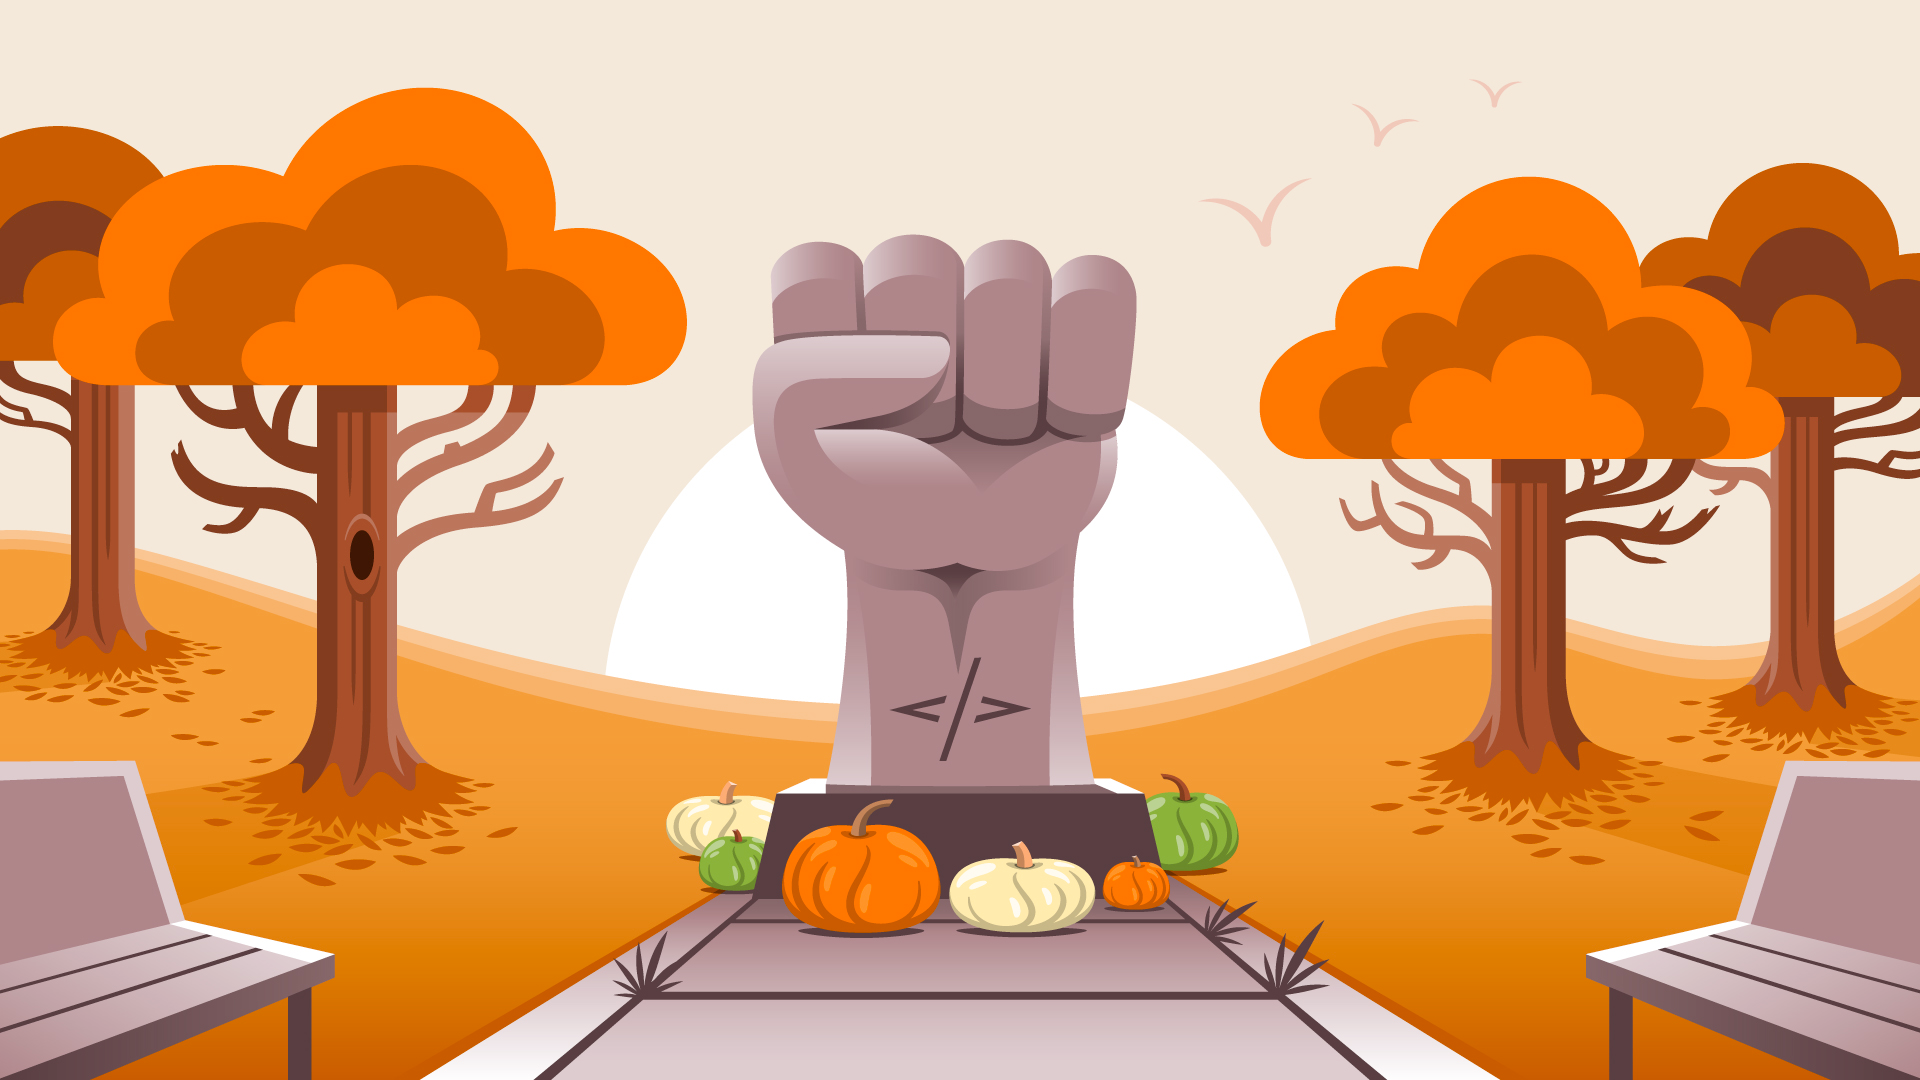 Fist coming out of the ground surrounded by a fall scene of pumpkins and trees